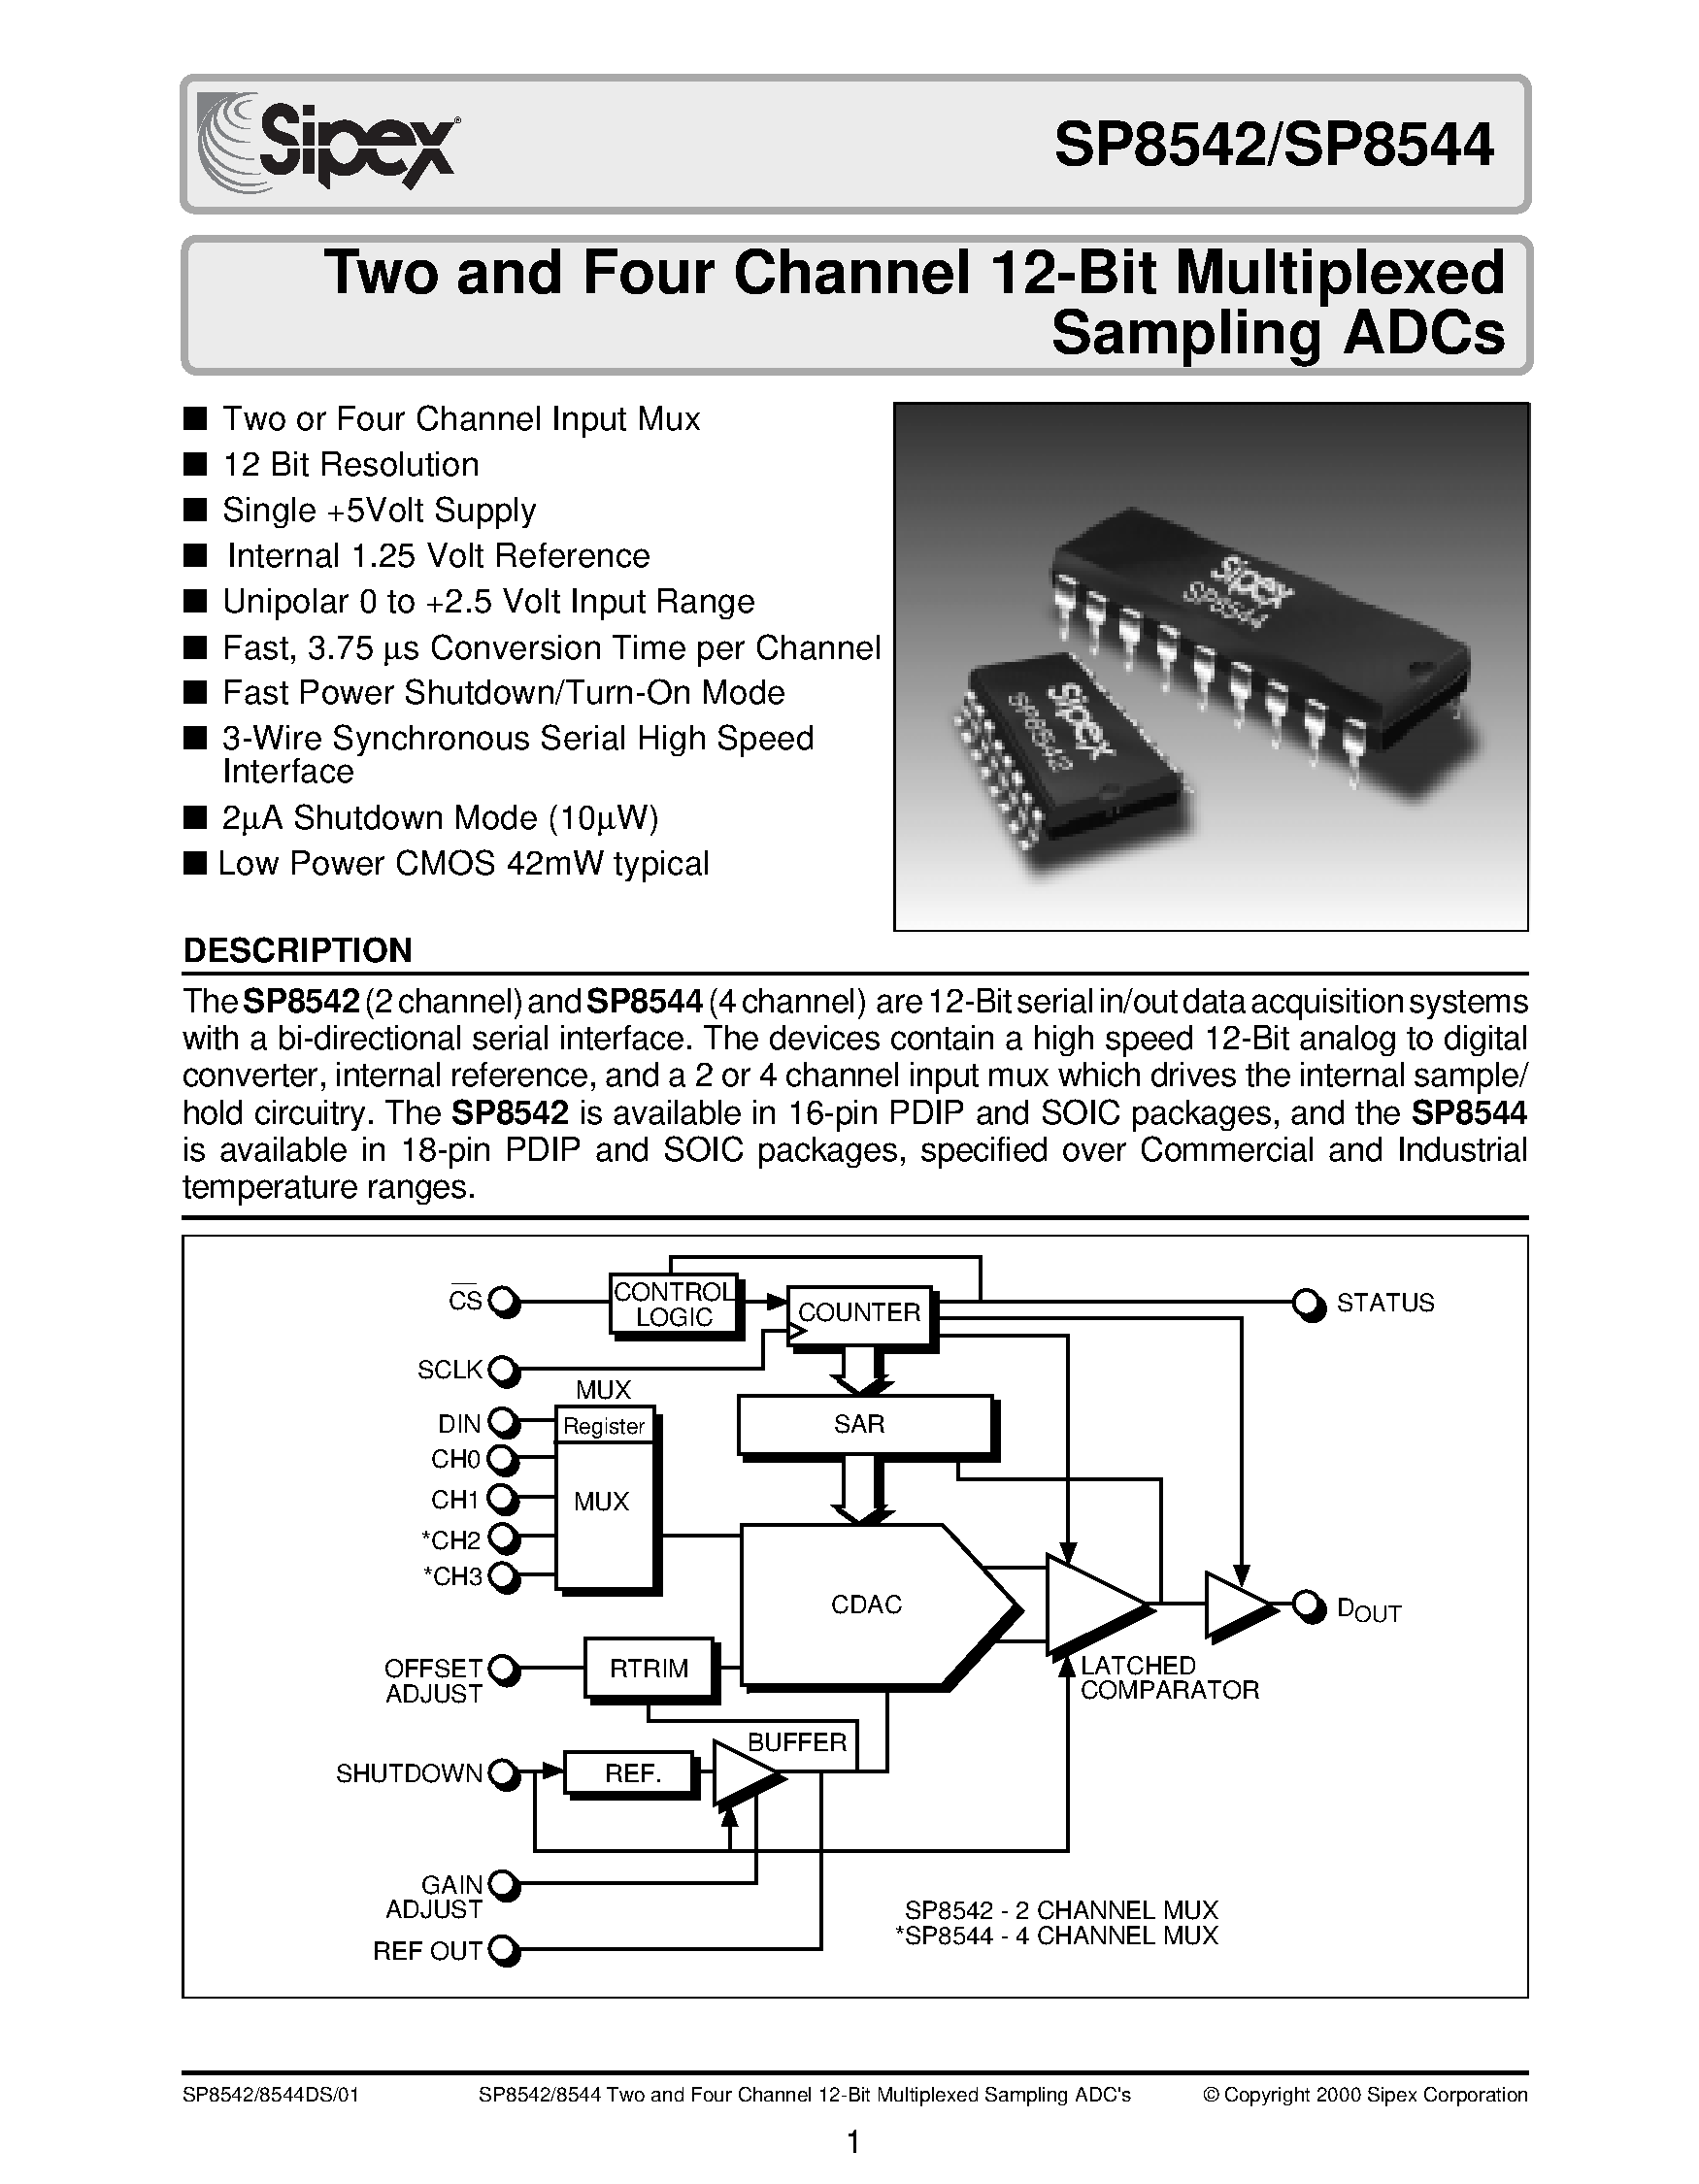 Datasheet SP8542BN - Two and Four Channel 12-Bit Multiplexed Sampling ADCs page 1